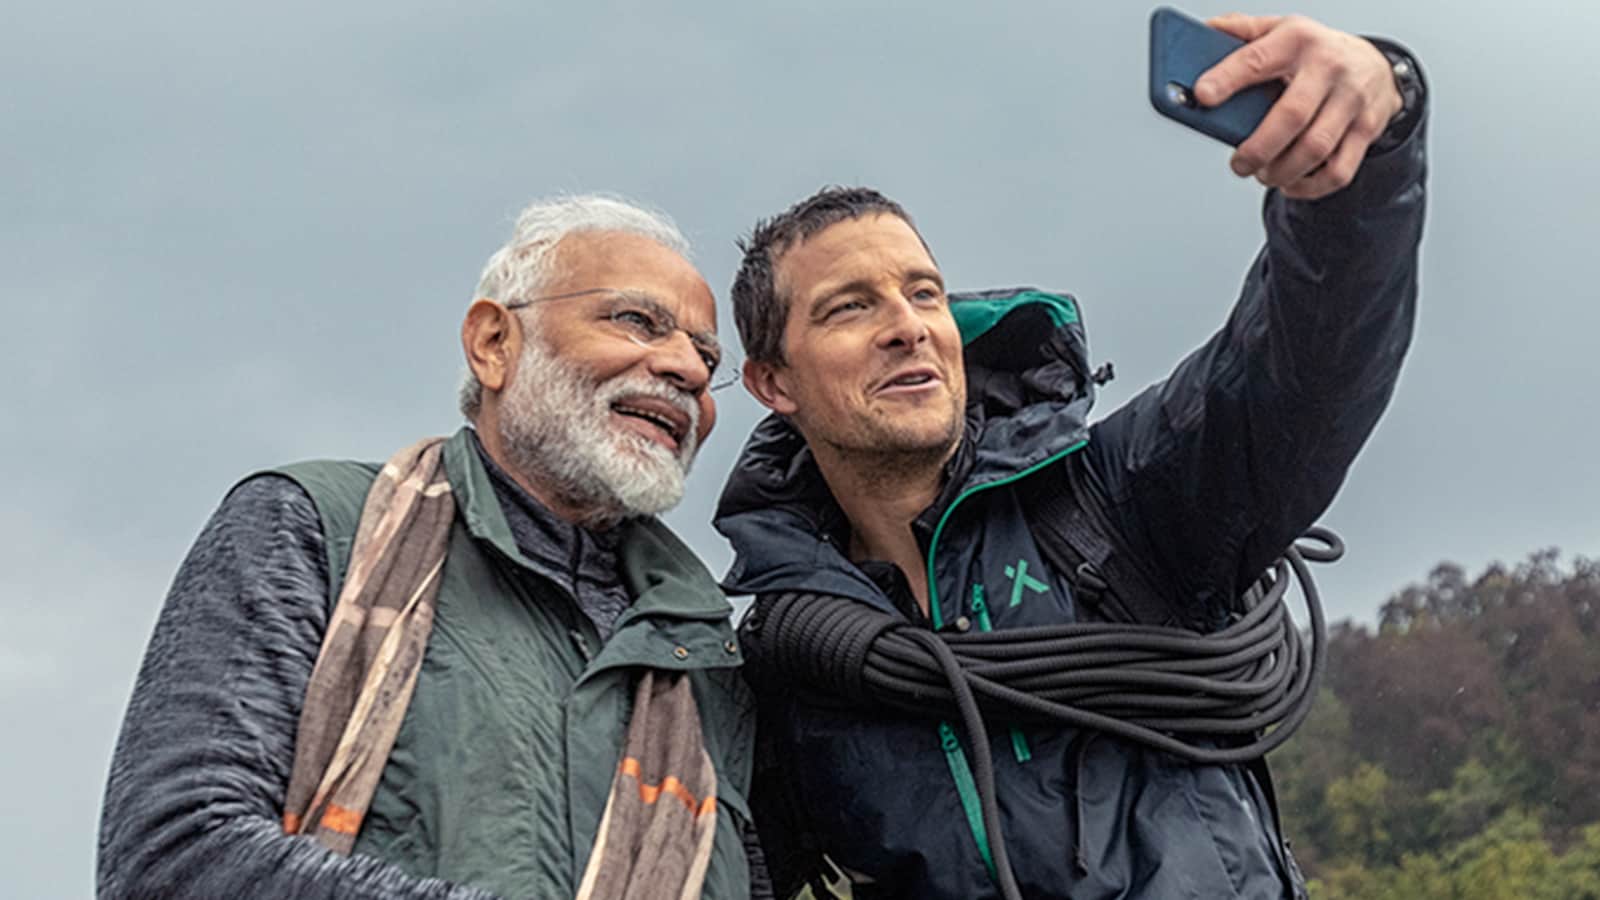 Man vs Wild episode featuring PM Modi was 'most trending televised event',  claims Bear Grylls